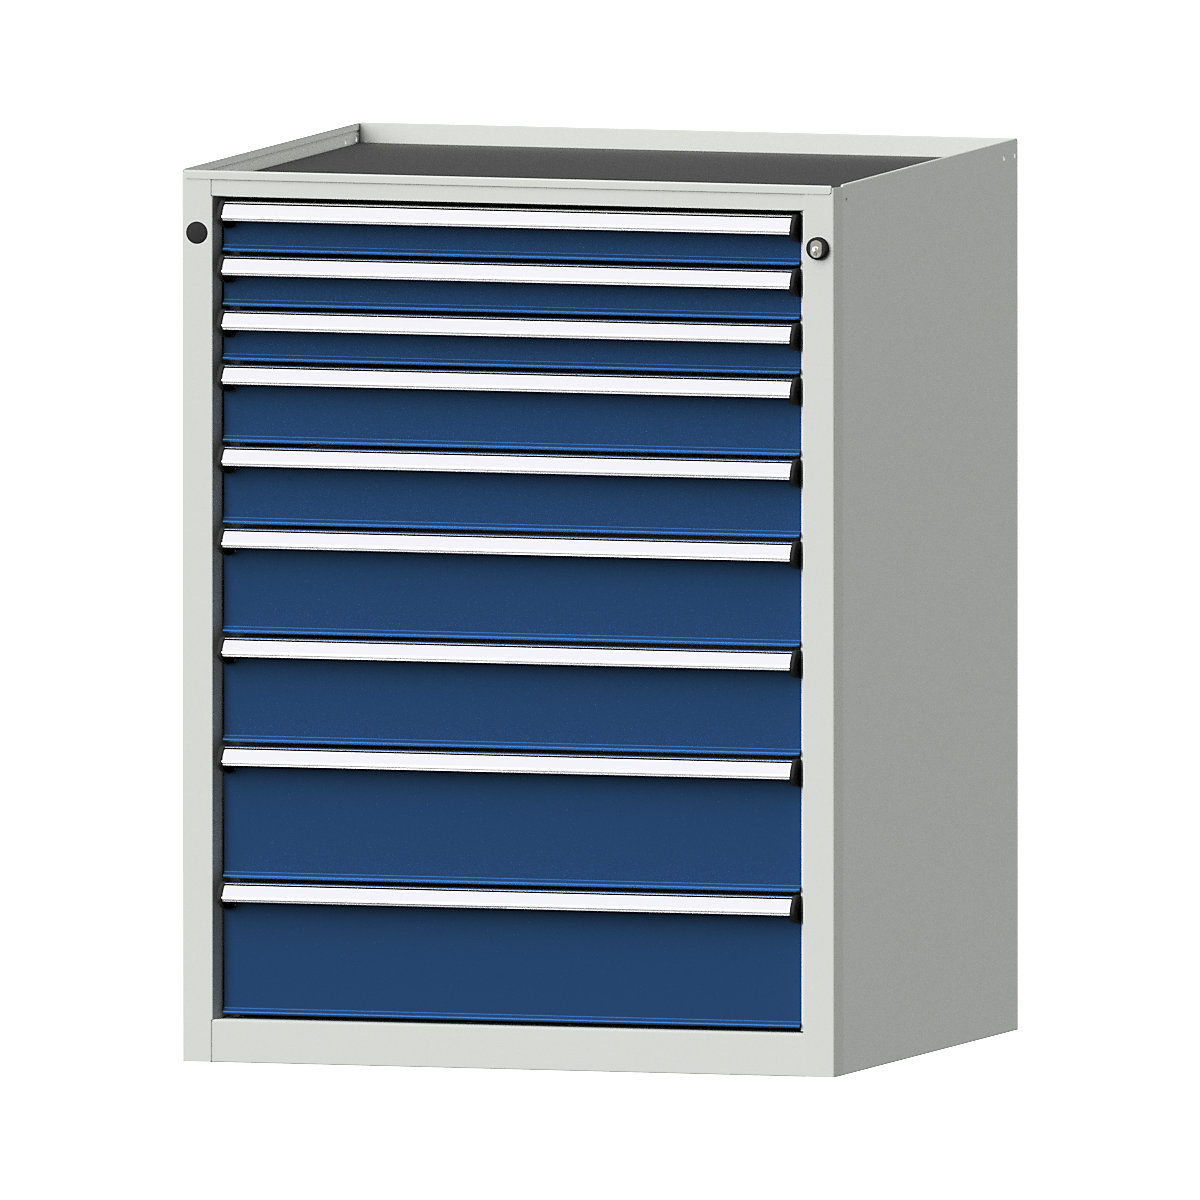 Drawer cupboard – ANKE, WxD 760 x 675 mm, 9 drawers, height 980 mm, front in gentian blue-17